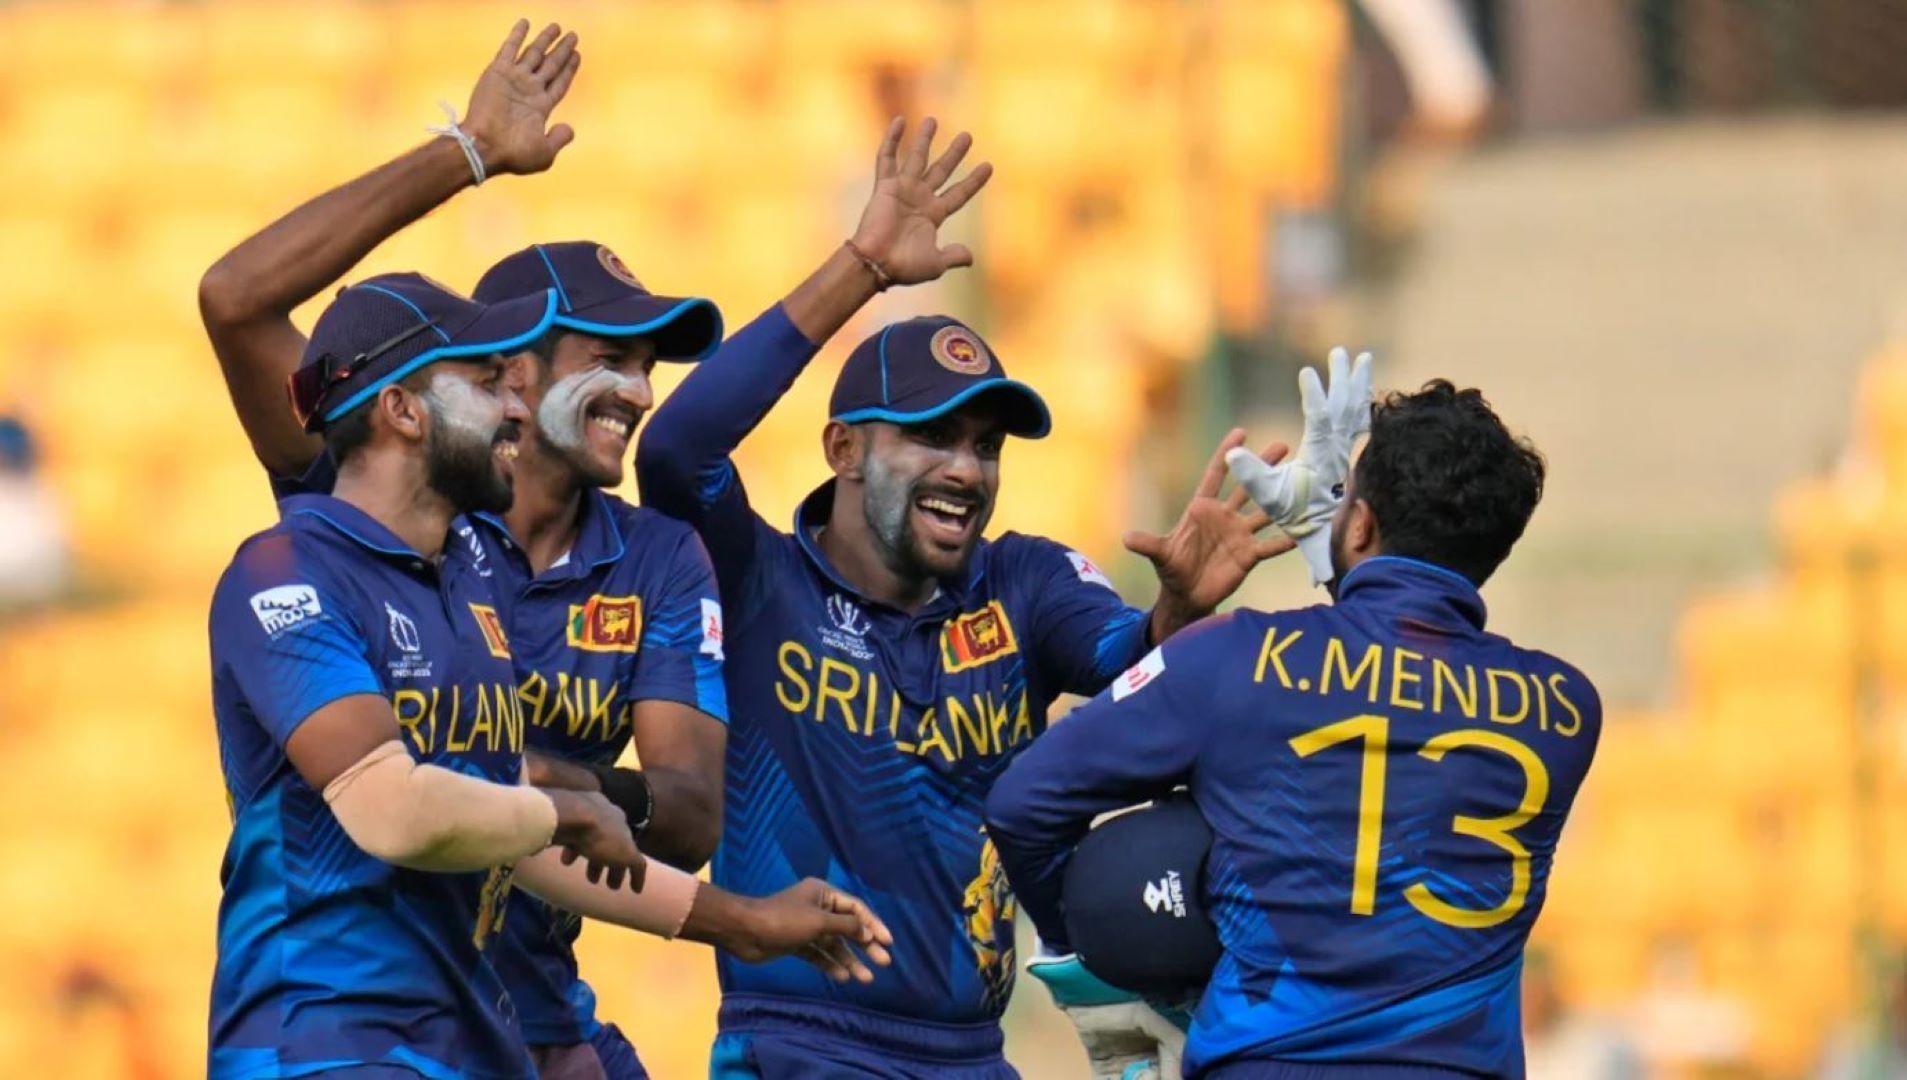 Sri Lanka are making a comeback into the World Cup with back-to-back wins.